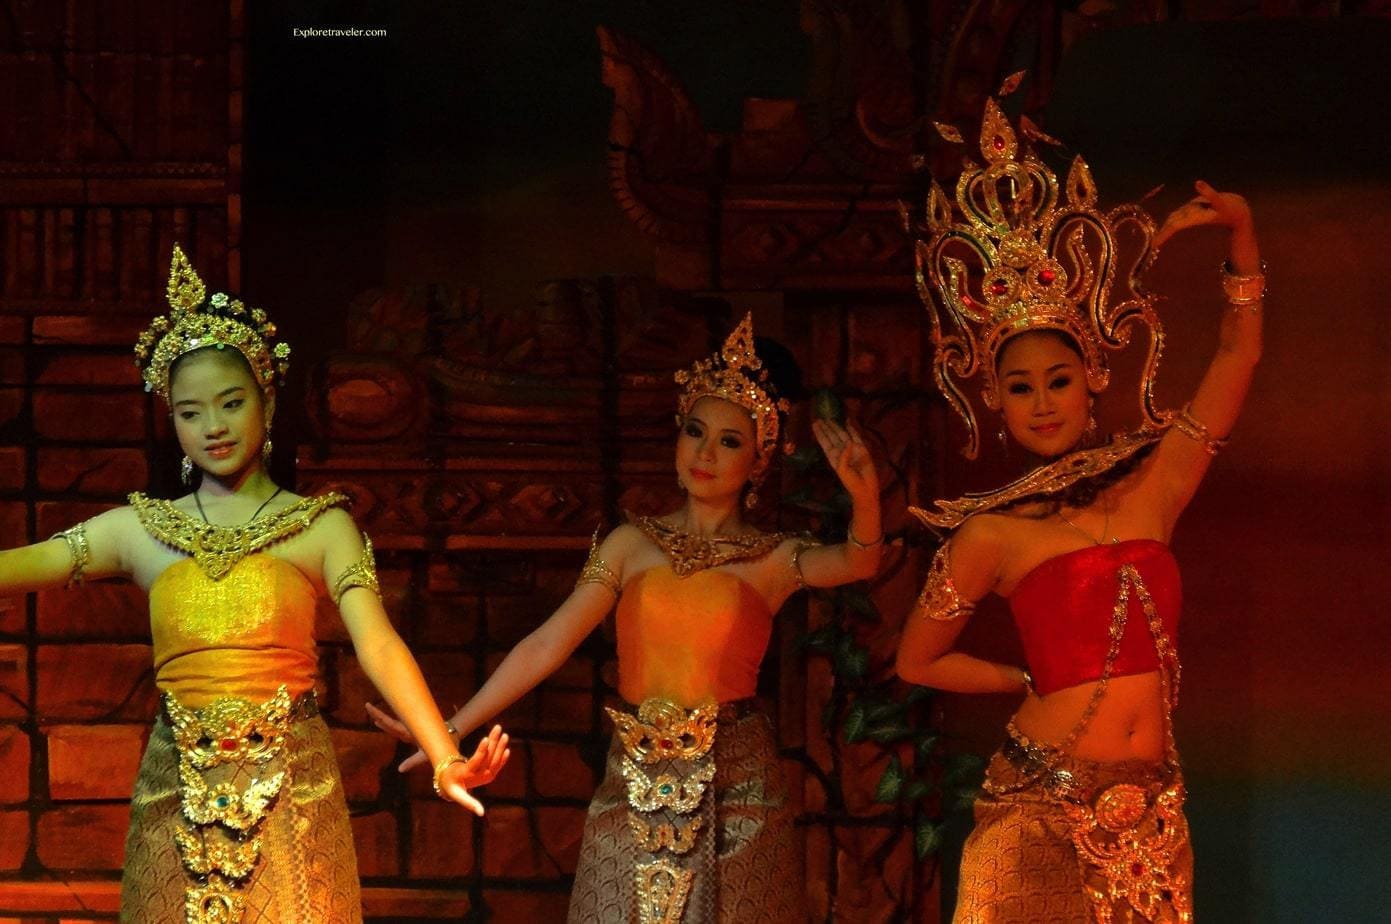 The traditional Thai Dance dates back to ancient Siamese times.